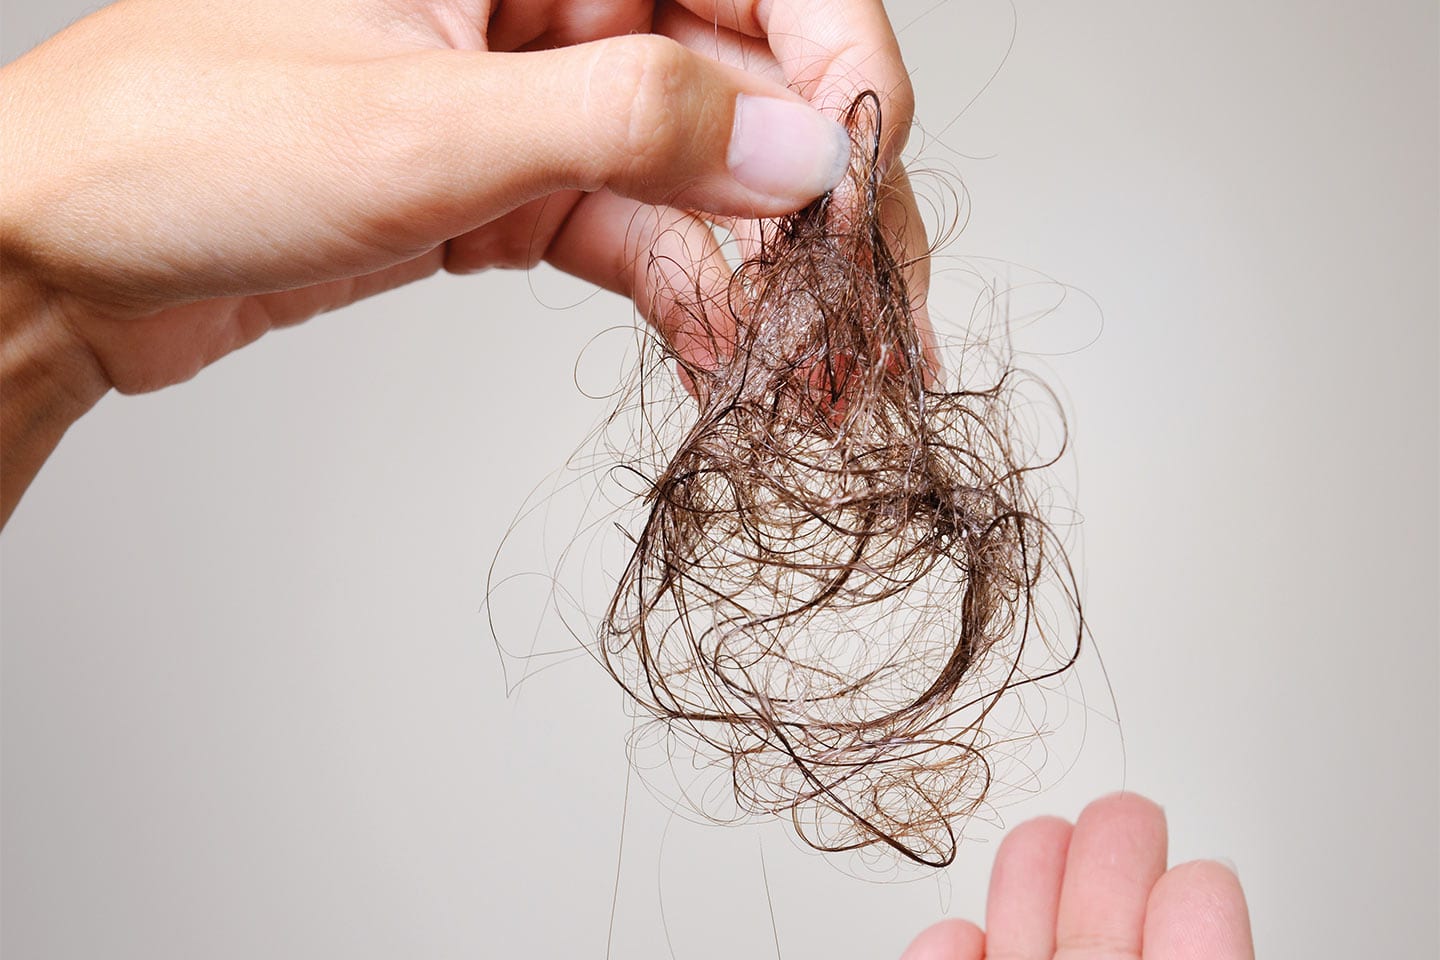 woman holding a clump of her hair due to hair loss